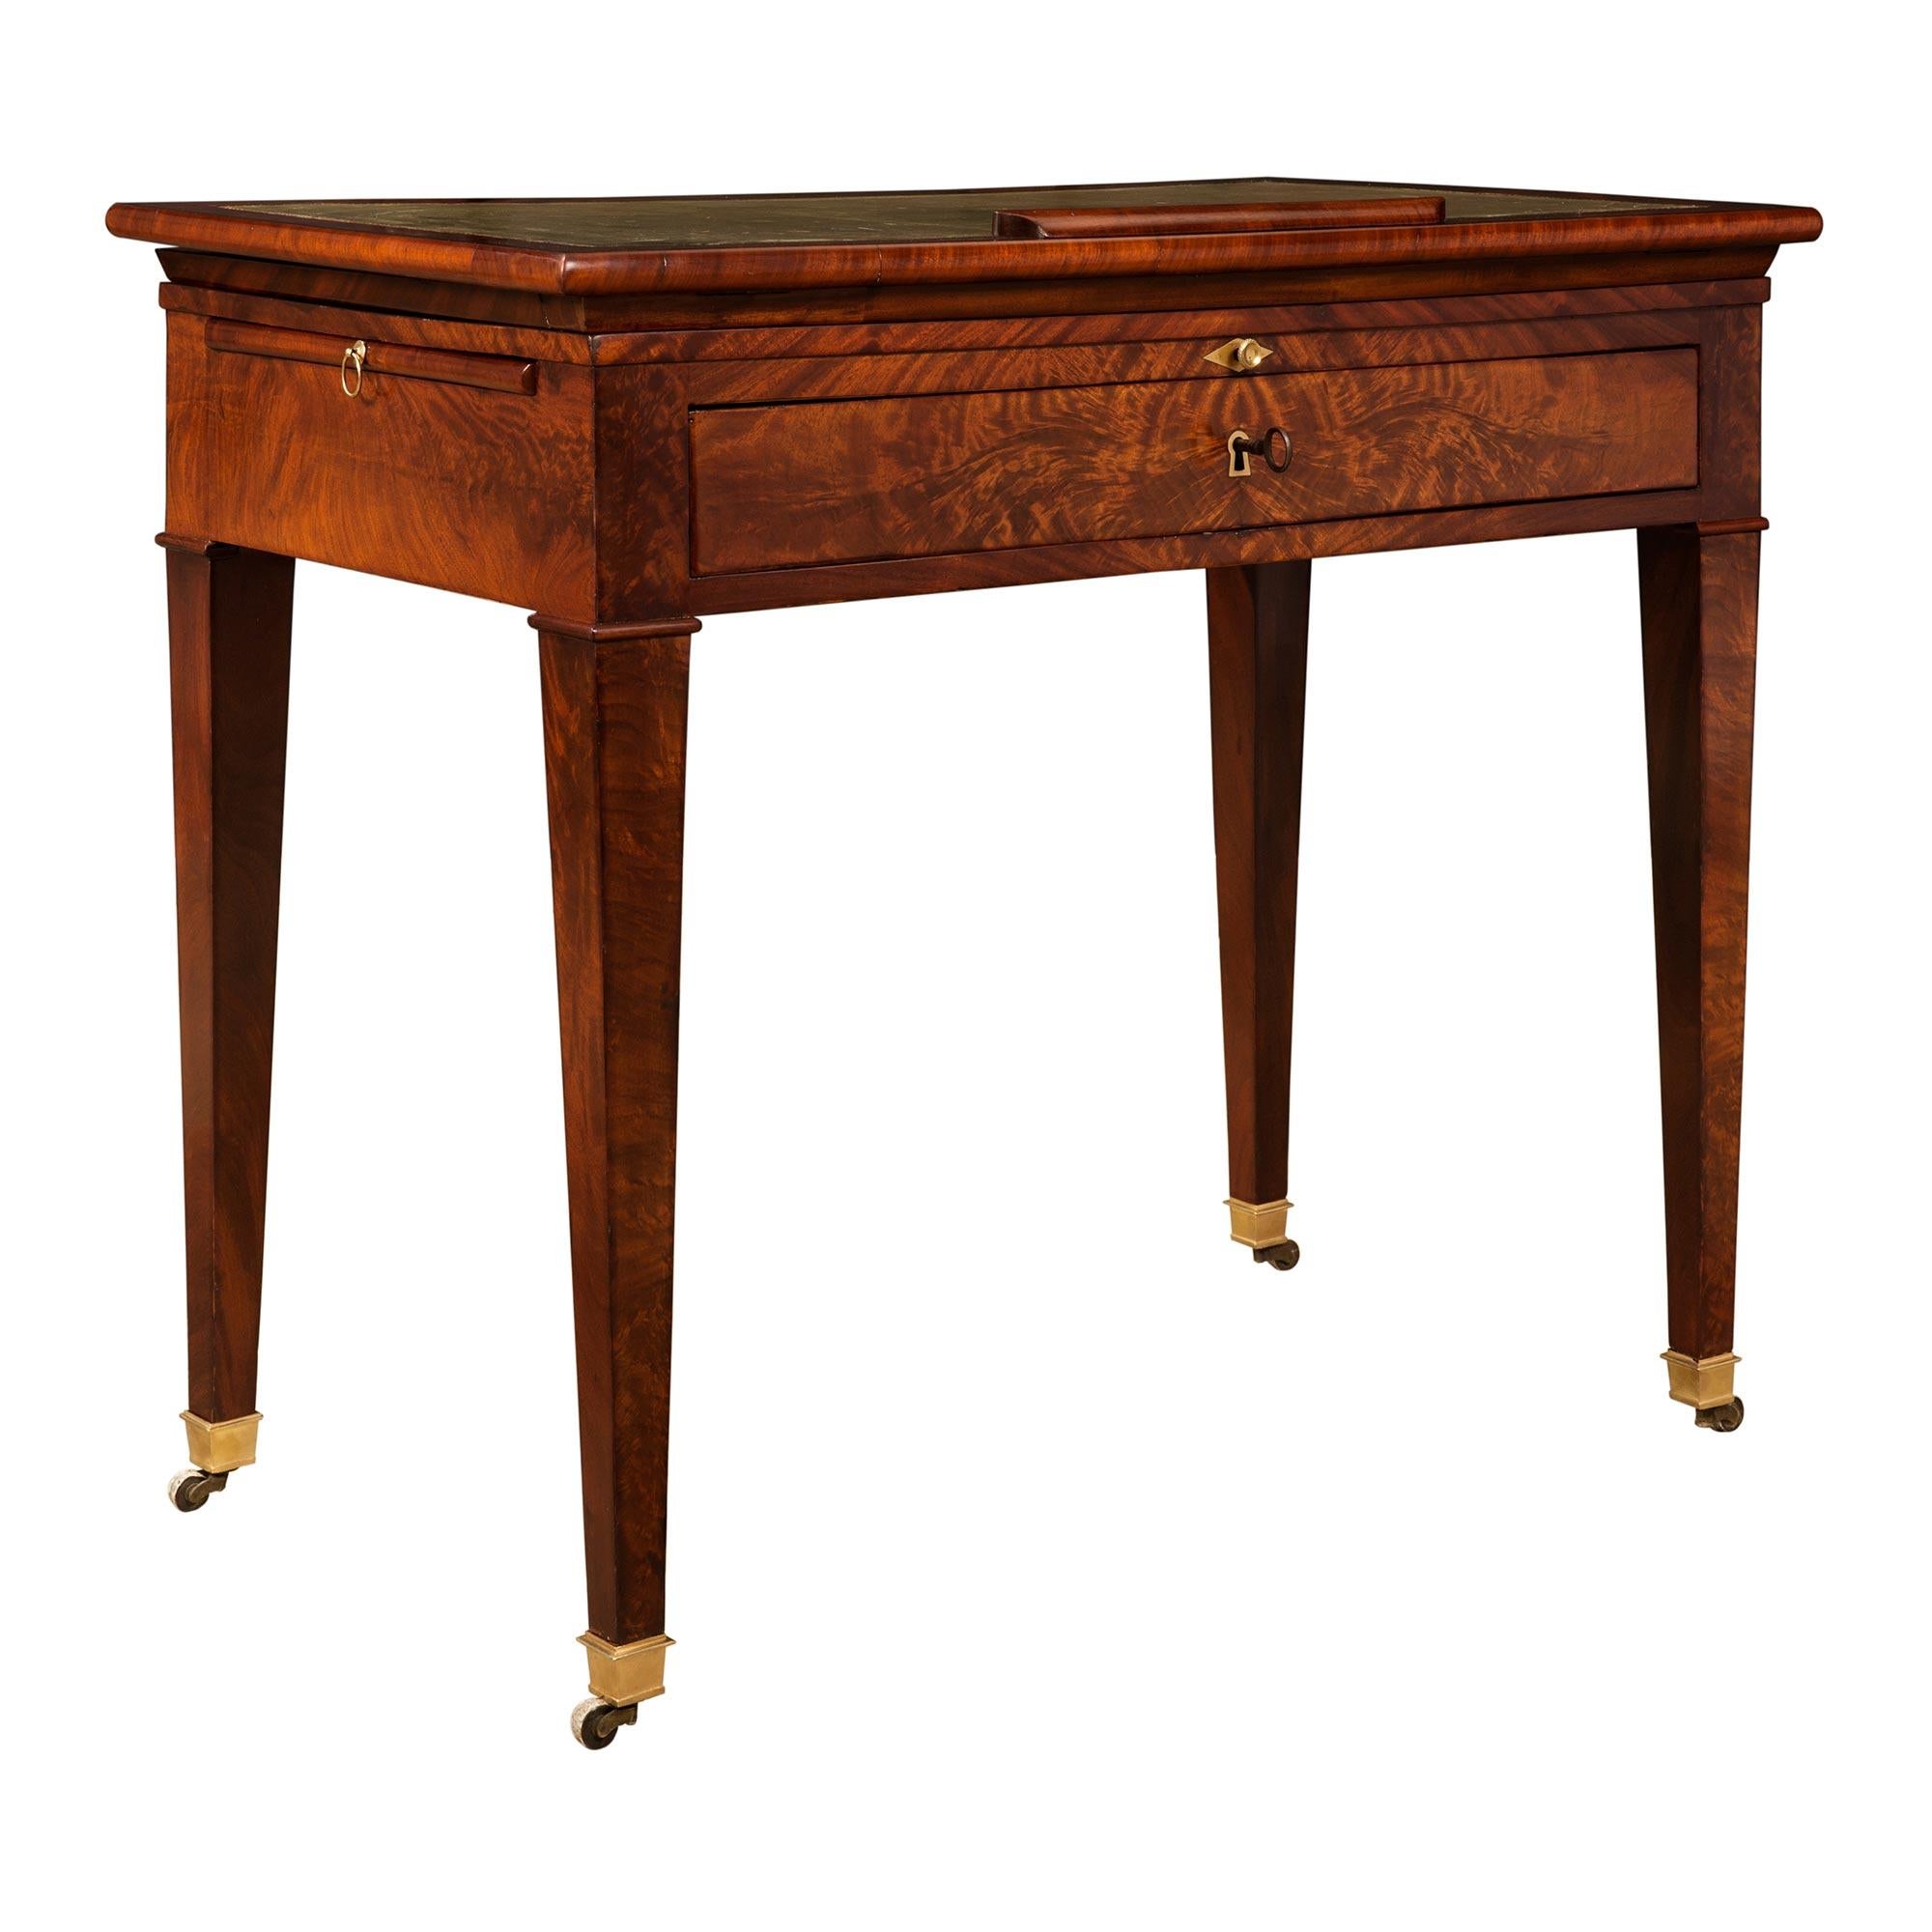 French 19th Century Louis XVI Style Mahogany Desk ‘A la Tronchin’ In Good Condition For Sale In West Palm Beach, FL